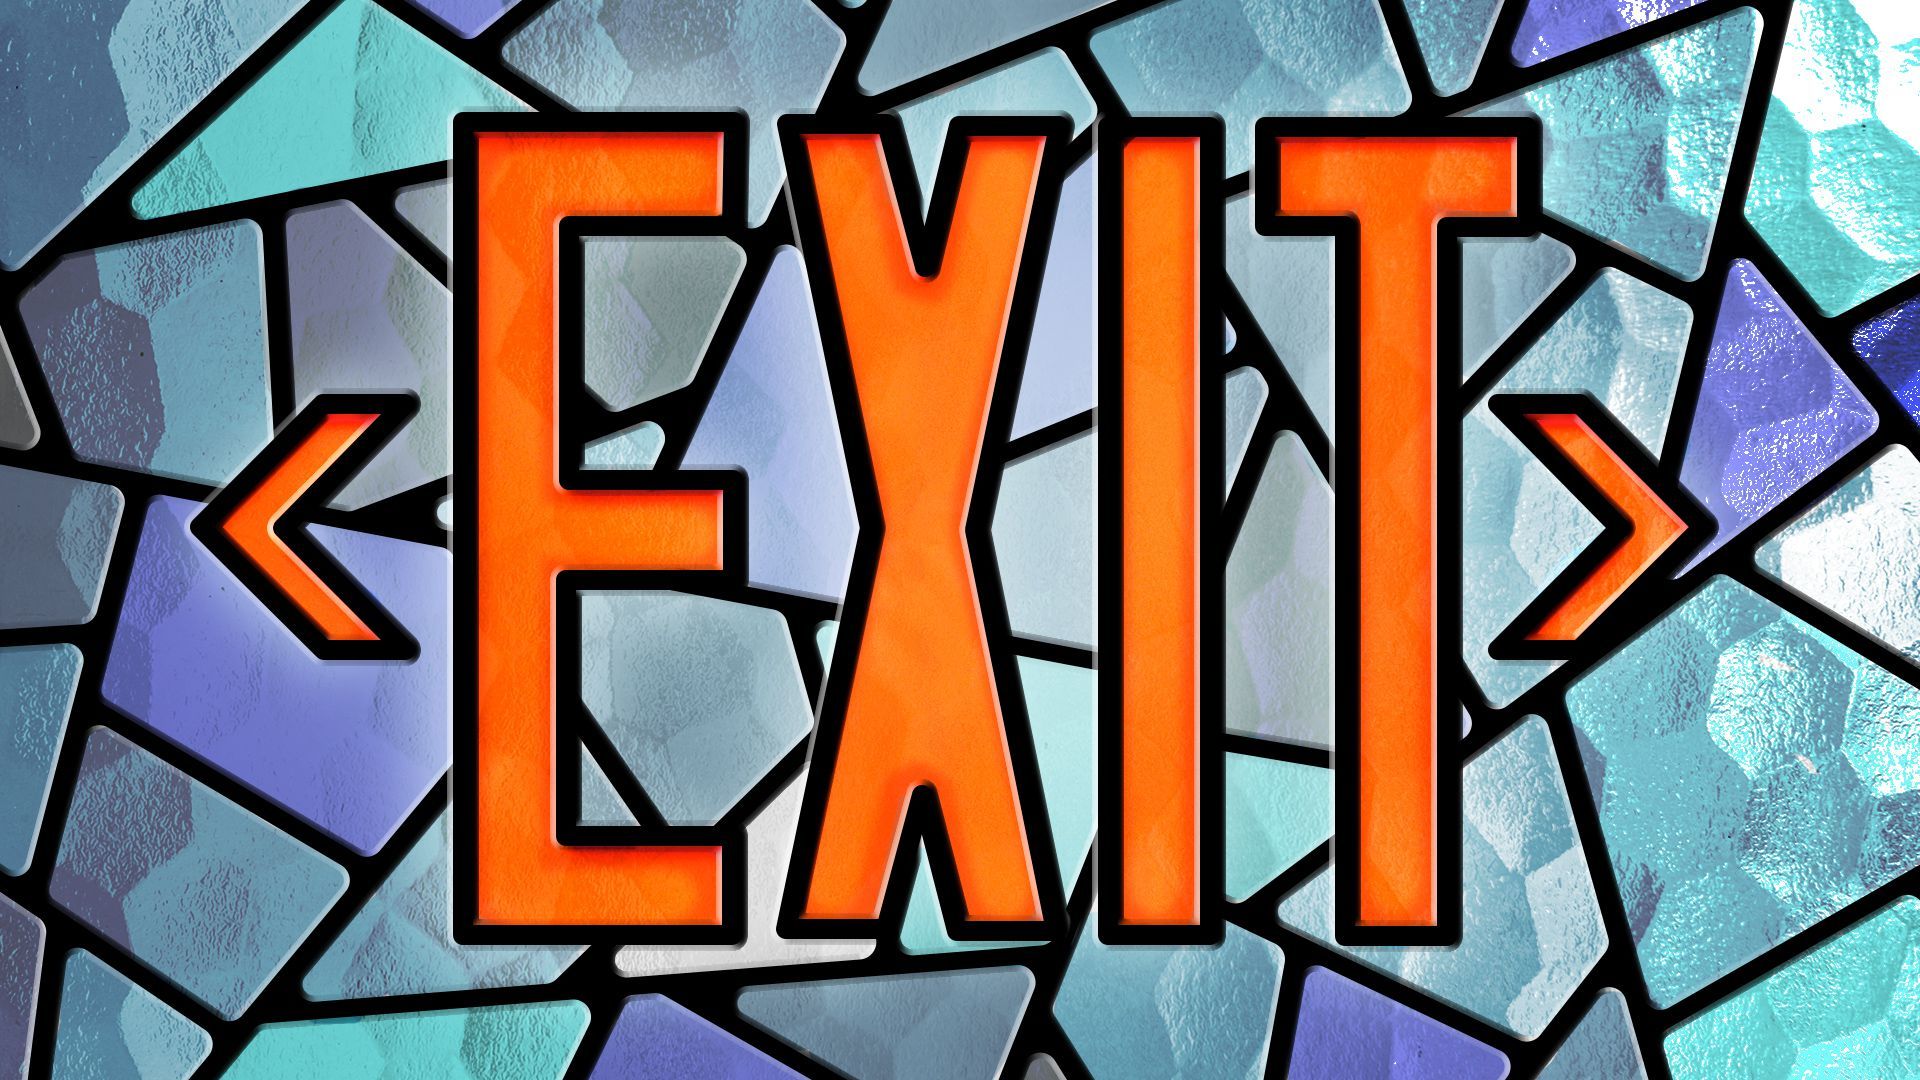 Illustration of a stained glass window stylized as an EXIT sign.   